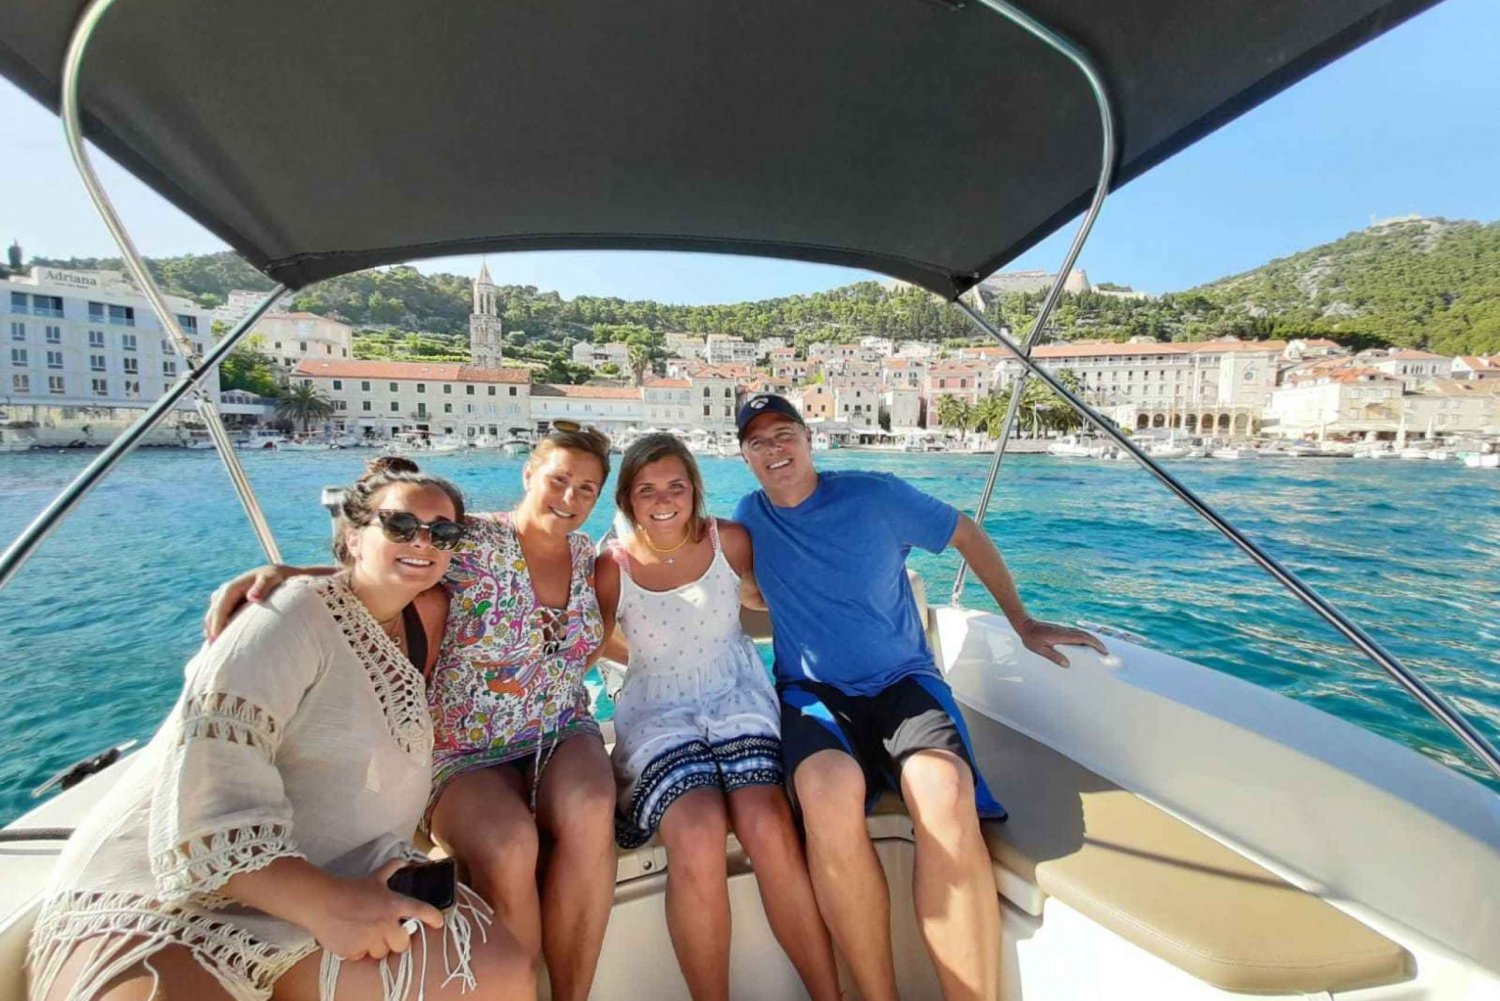 From Trogir: Blue Cave, Hvar and 5 Islands Private Boat Tour